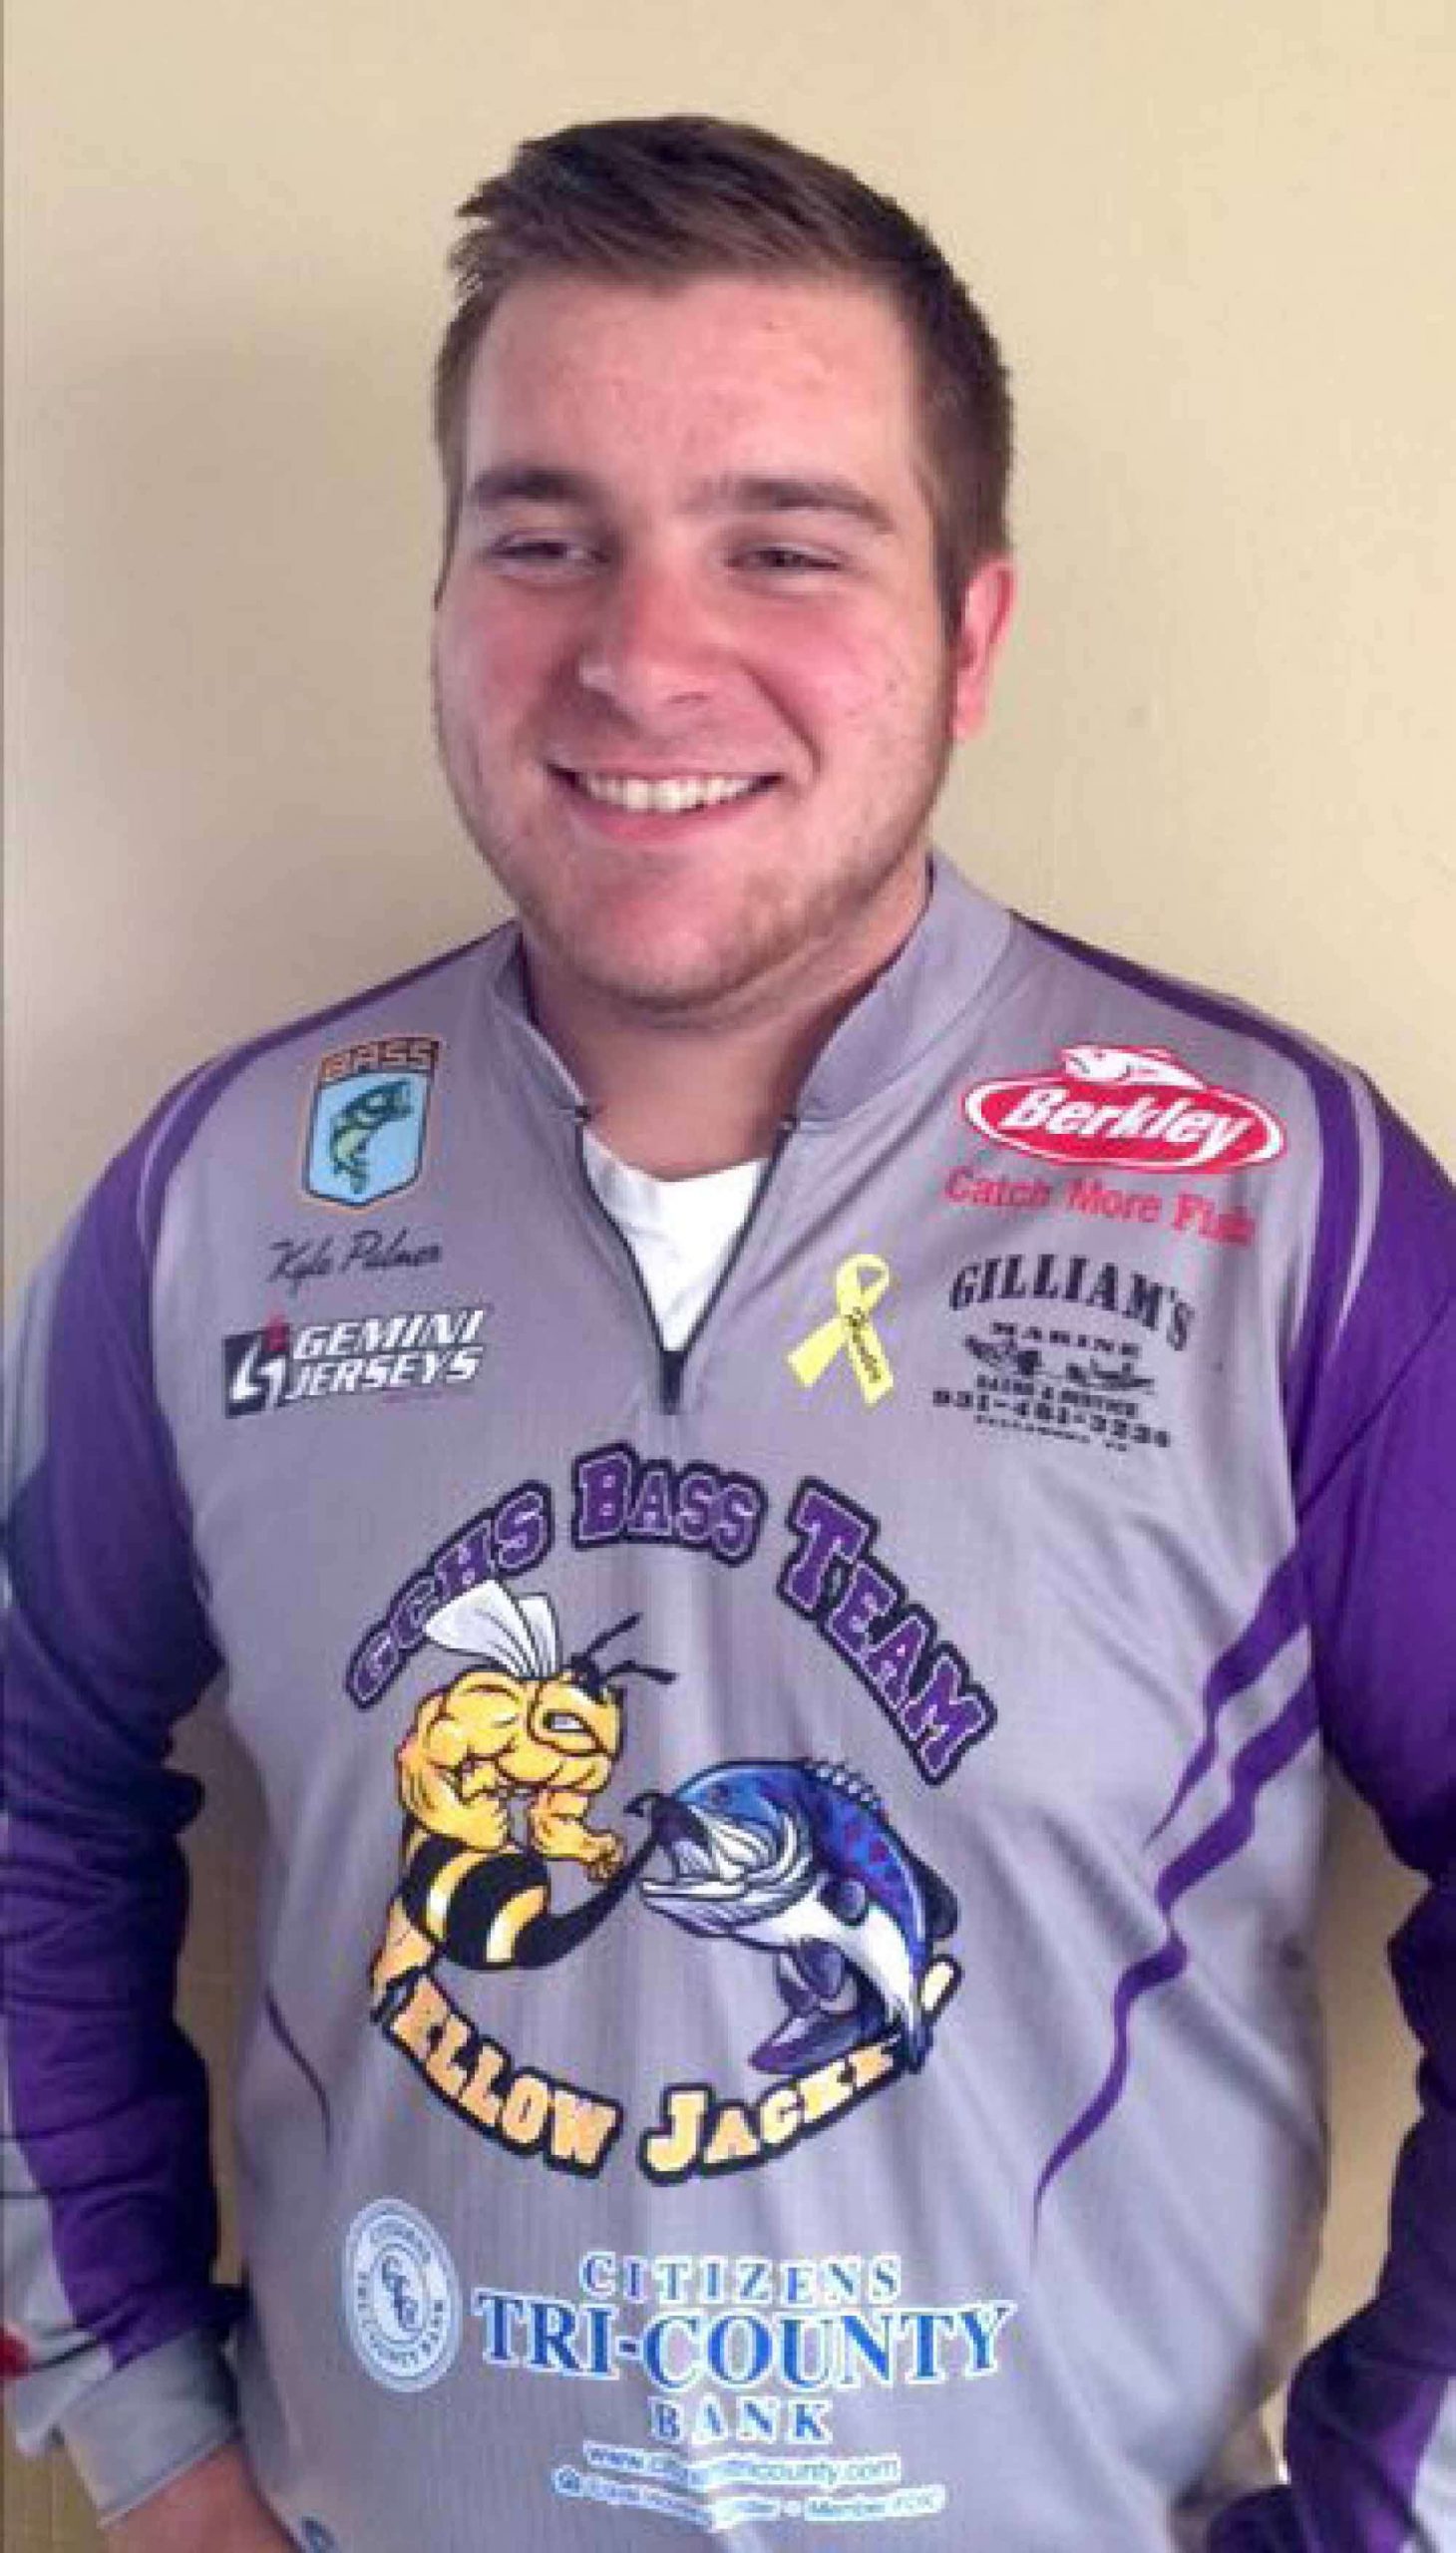 <b>Kyle Palmer, Estill Springs, Tenn. </b><br>
A senior on the Grundy County High School fishing team, Palmer has tallied an impressive six wins in the past 12 months, including a 160-boat Bassmaster High School divisional on Lake Chickamauga and a 93-boat event on Percy Priest. Palmer also earned five other Top 10 finishes and was awarded Grundy County High School Team of the Year with his fishing partner, Kyle Ingleburger.
<p>

Palmer is currently serving his second year as the president of his high school bass team, and assisted with two major fundraisers for a freshman teammate with cancer. 
<p>

âHe is the leader of the Faith Unleashed club â¦â wrote Rita Sliger, Franklin County High School. âThey discussed positive and proper ways to handle situations. This also included trying to find morally good and fair solutions to problems they each have to faced.â
<p>

Palmer has just recently received a fishing scholarship for Bethel University in Tennessee for the fall 2017 semester.
